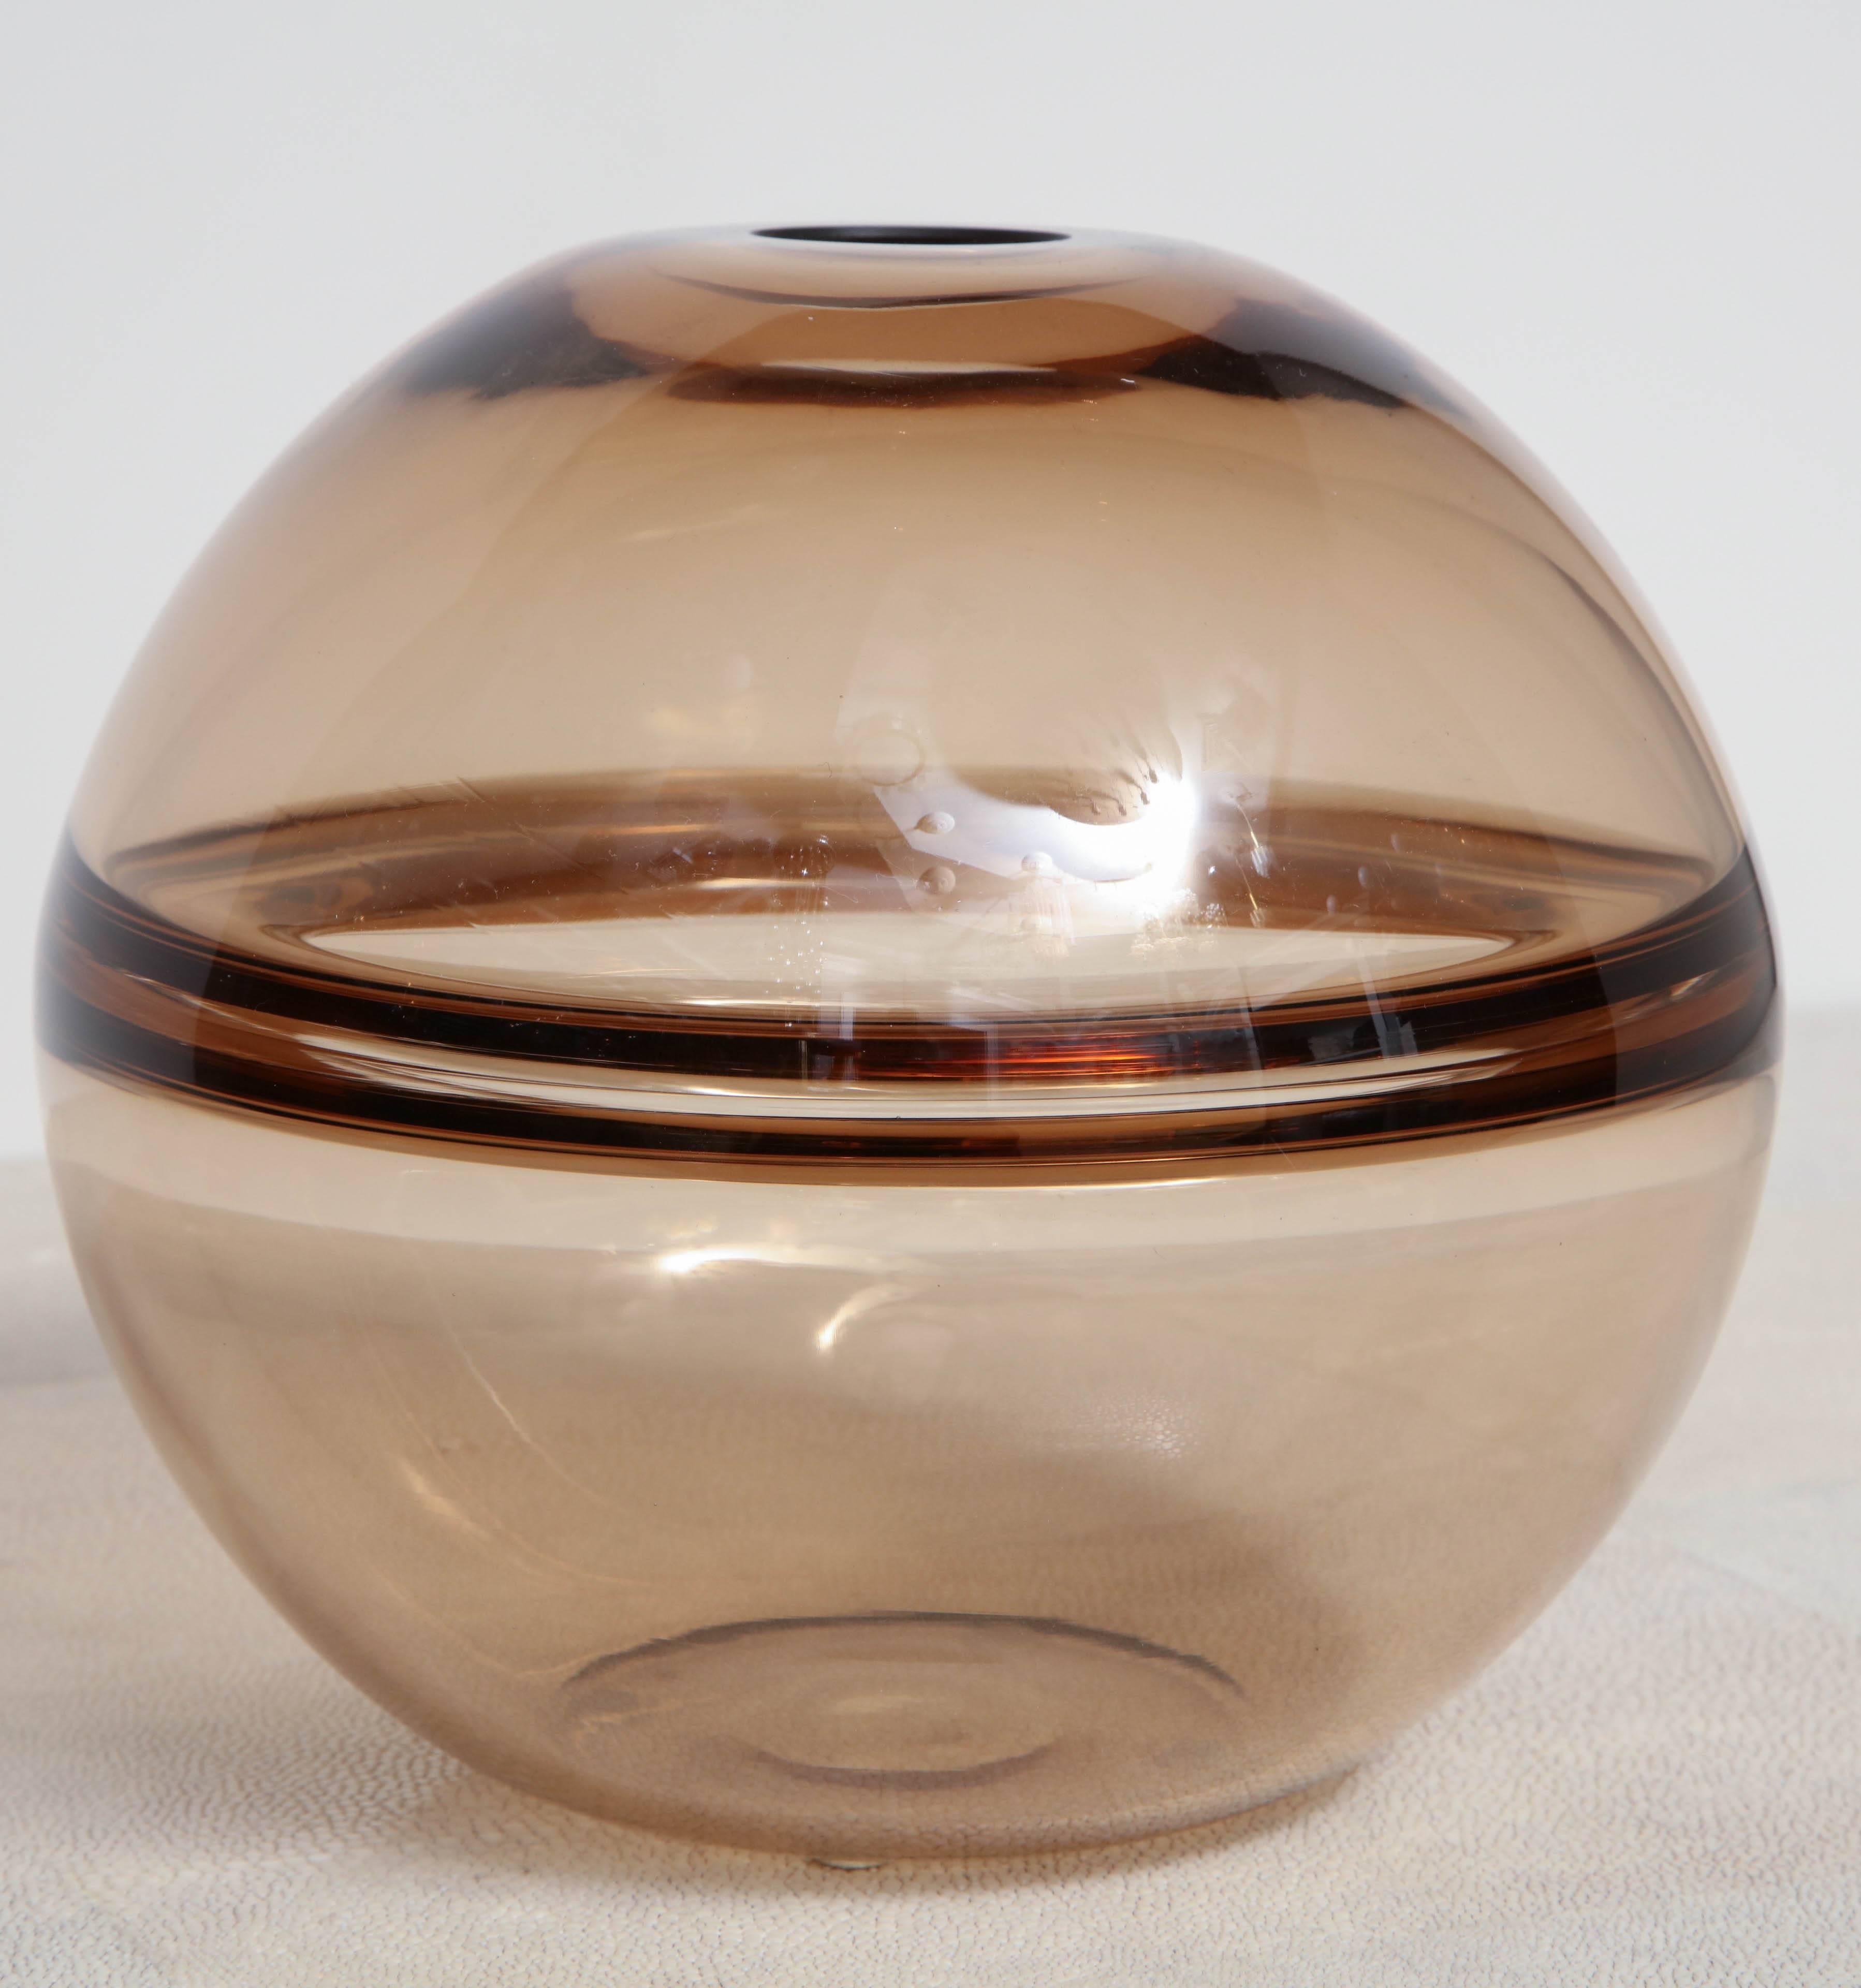 Signed Crepax vase in tobacco color Murano glass.